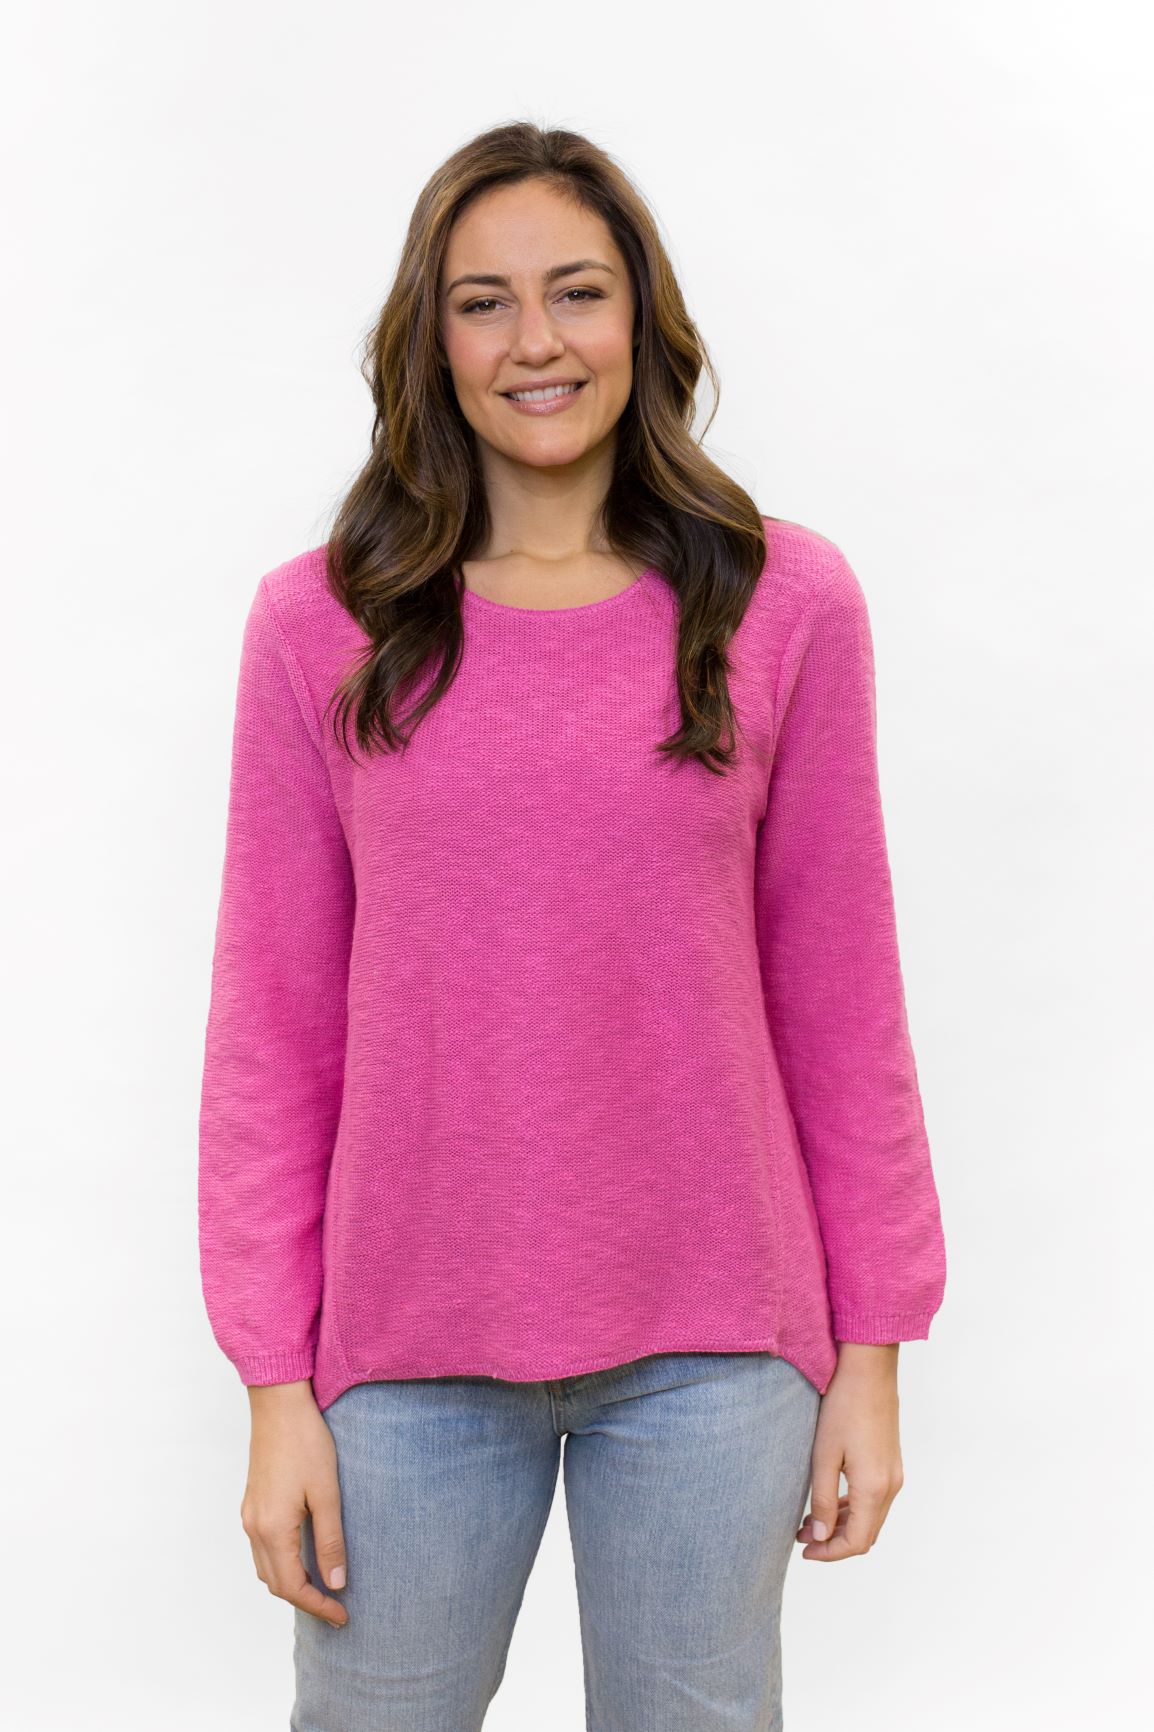 100% cotton slub sweater by Avalin. In color Fuchsia with long sleeves, crew neck, and high low hem that falls nicely to cover hips and derriere. Made in USA. 